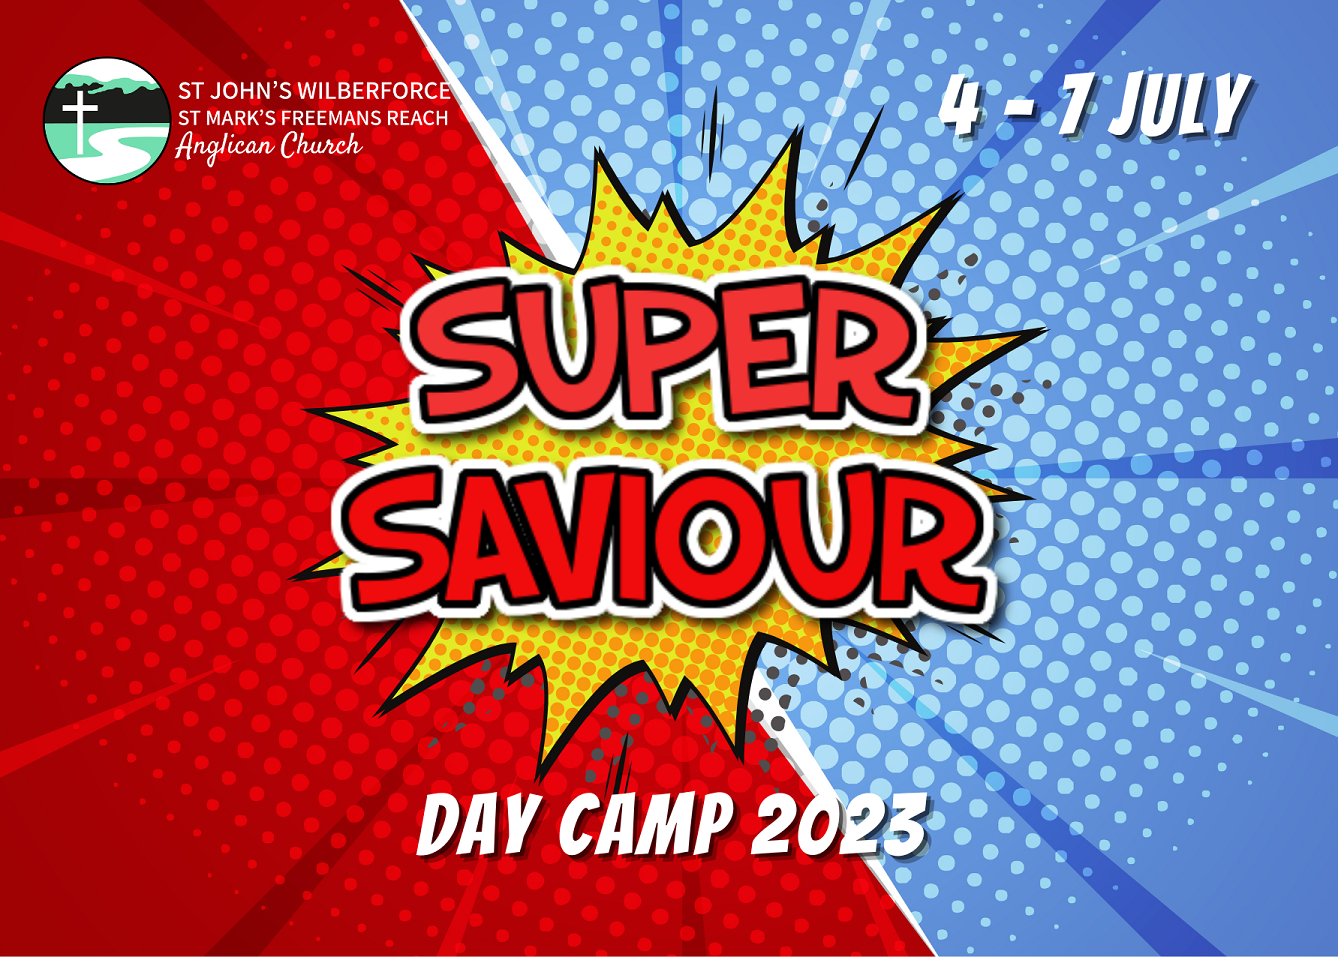 Day Camp 2022